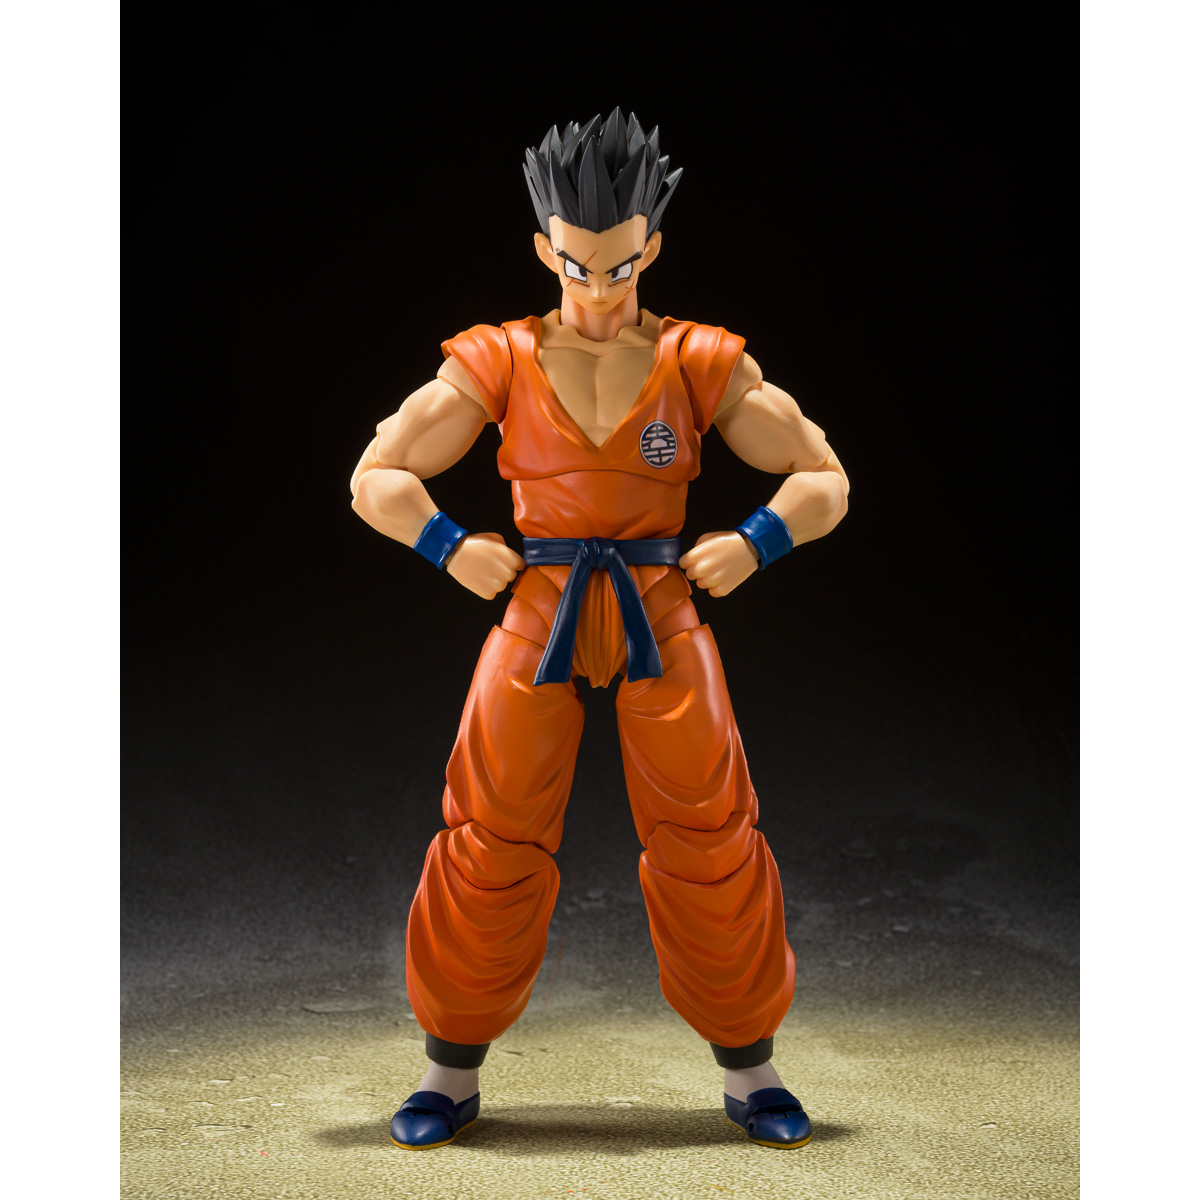 Bandai S.H Figuarts Android 16 Dragon Ball Z Action Figure for sale online